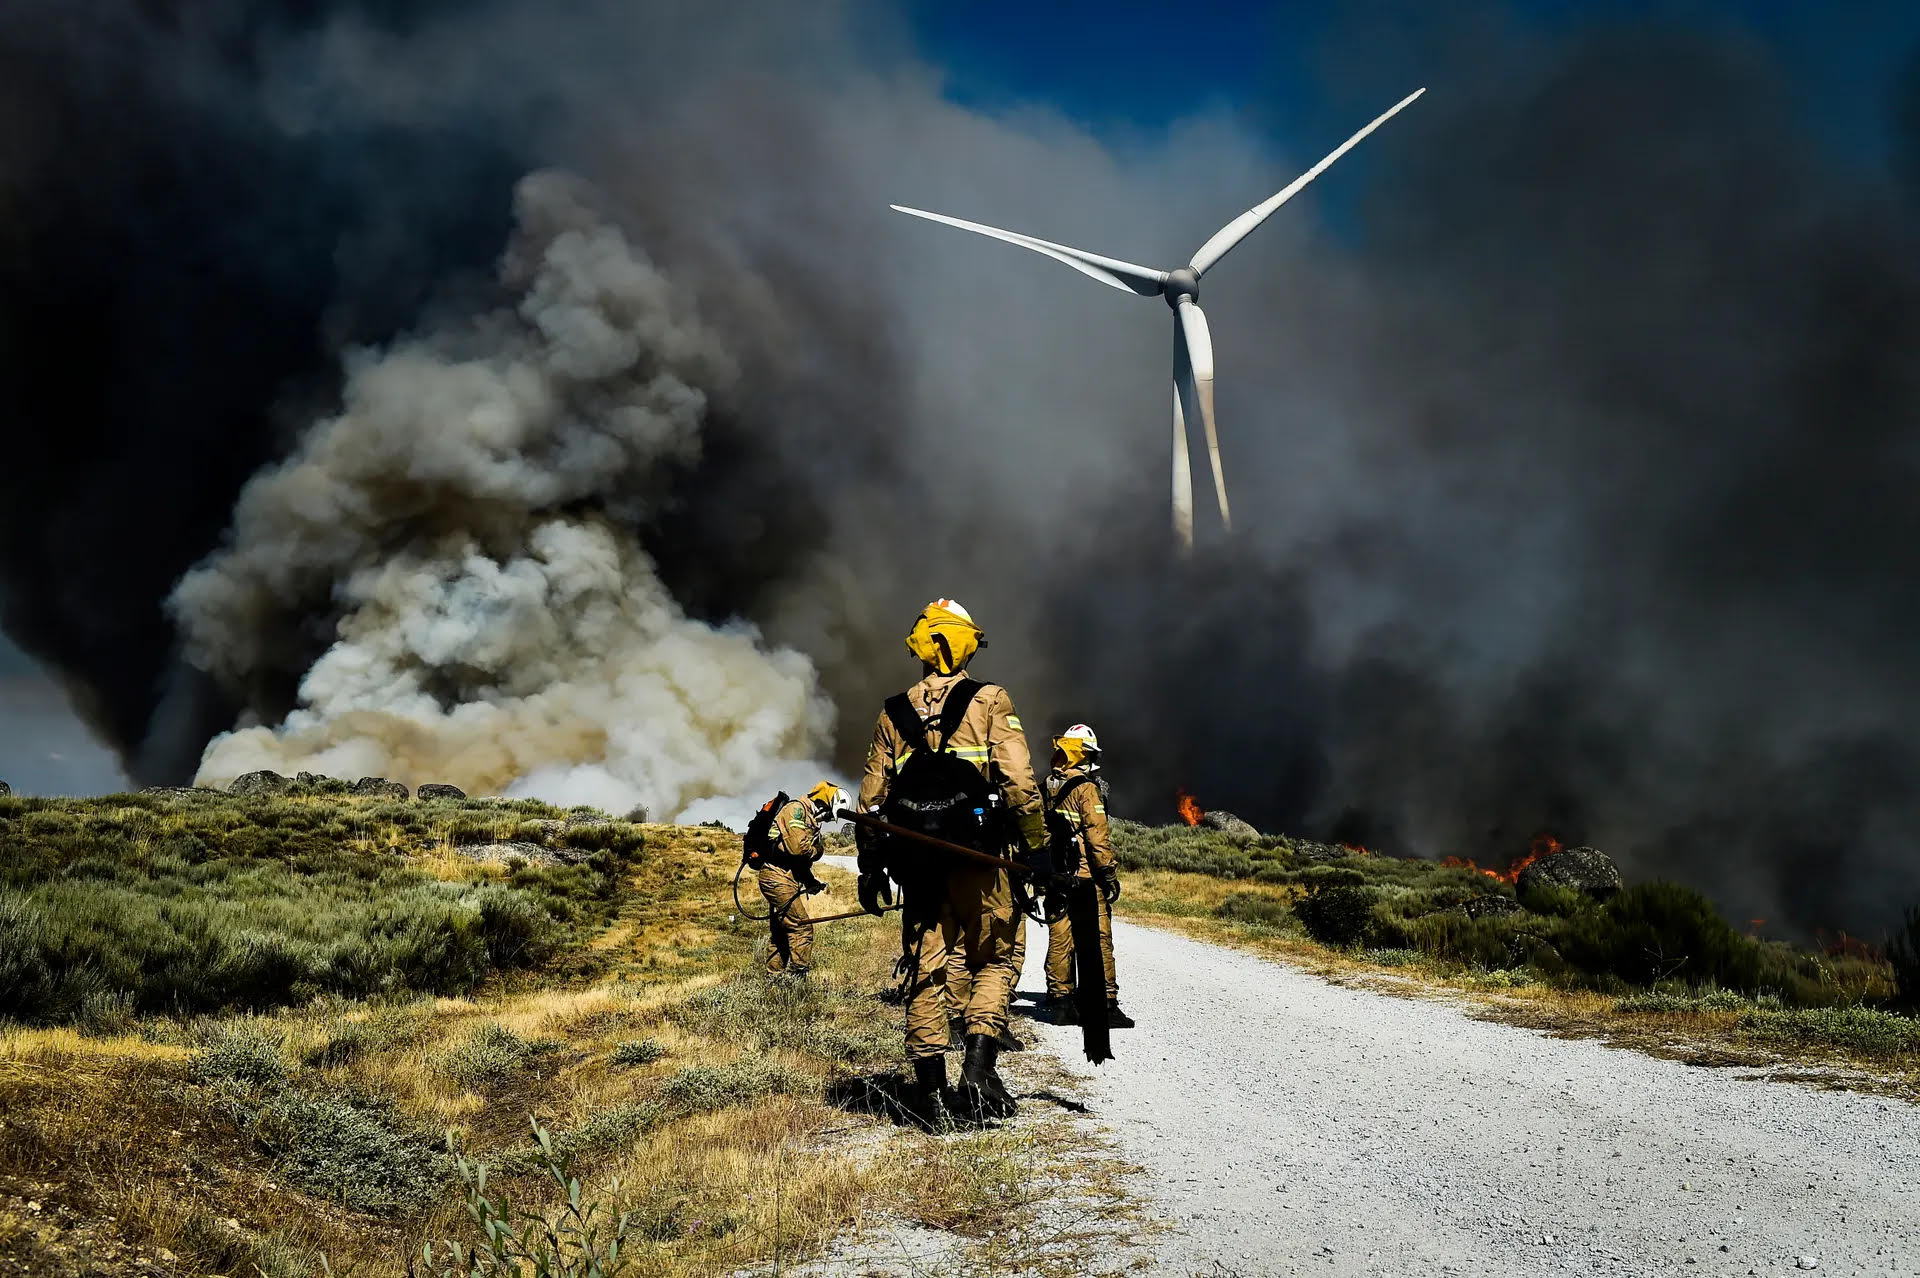 Chatting the Pictures: When the Wind Turbine Met the Wildfire